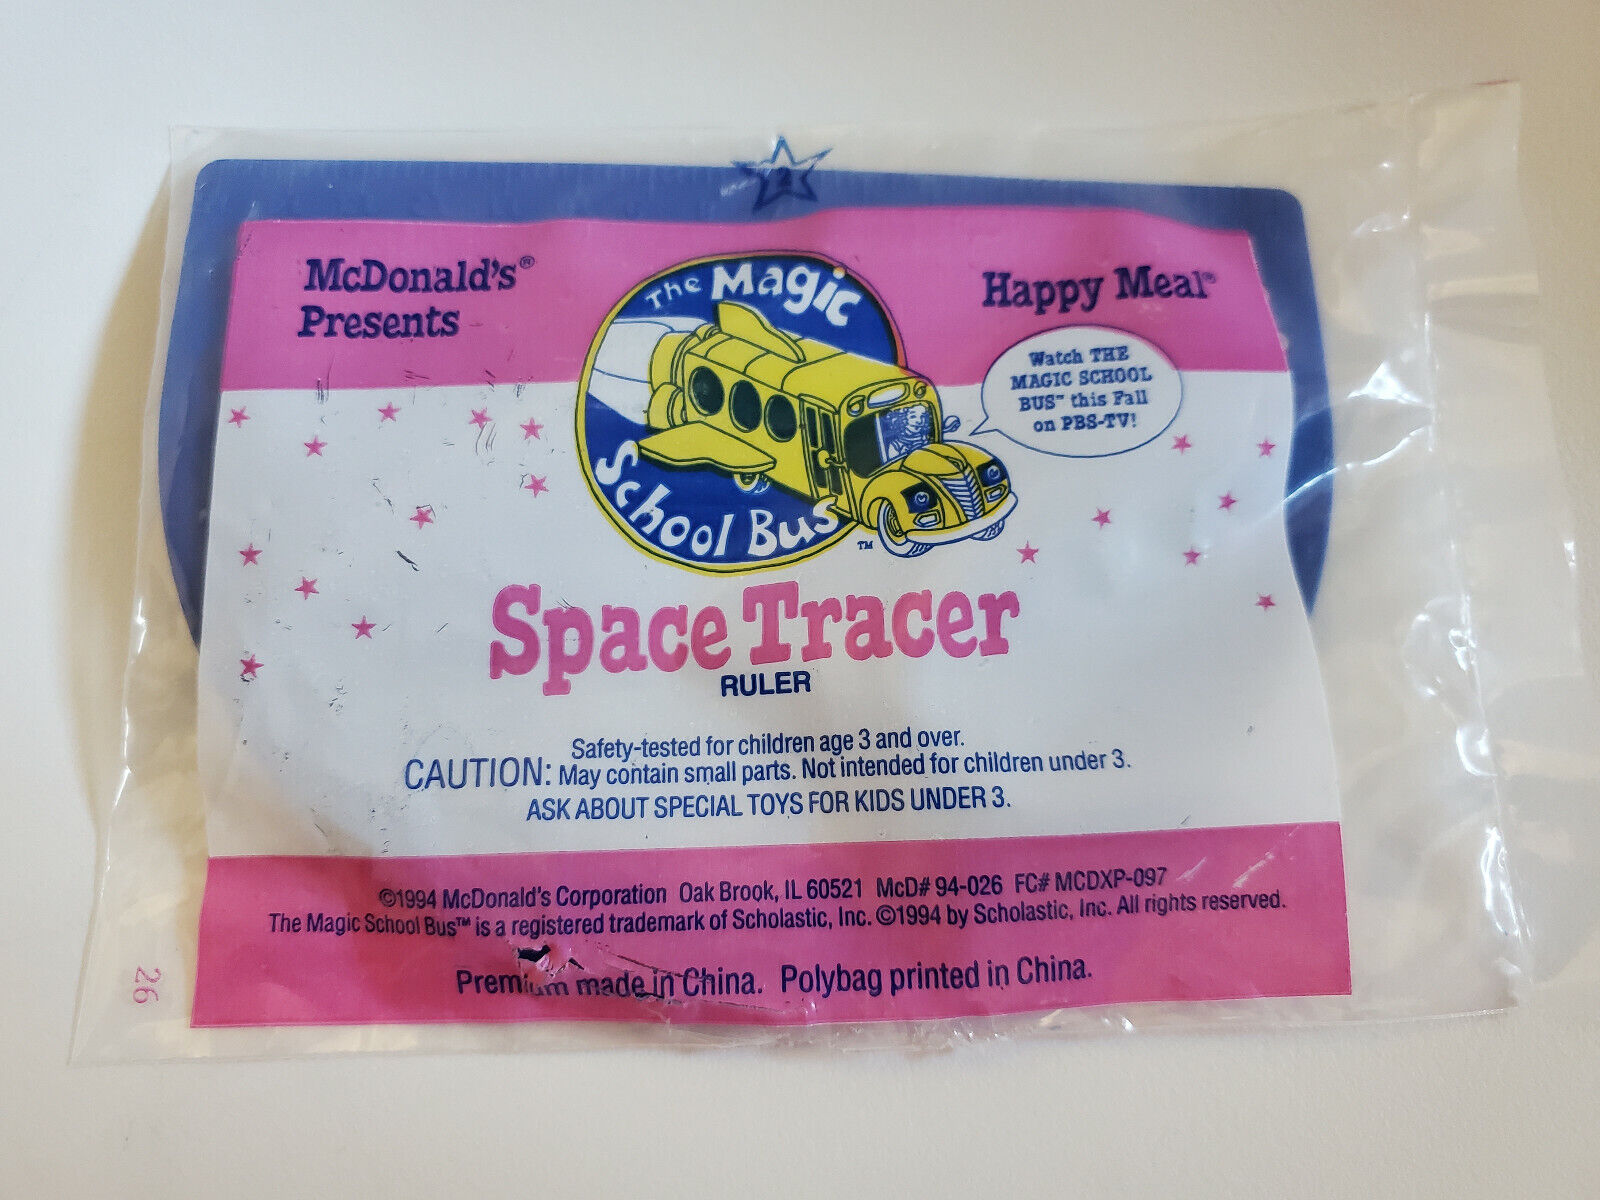 McDonalds toy 1994 The Magic School Bus Spacetracer Ruler - New